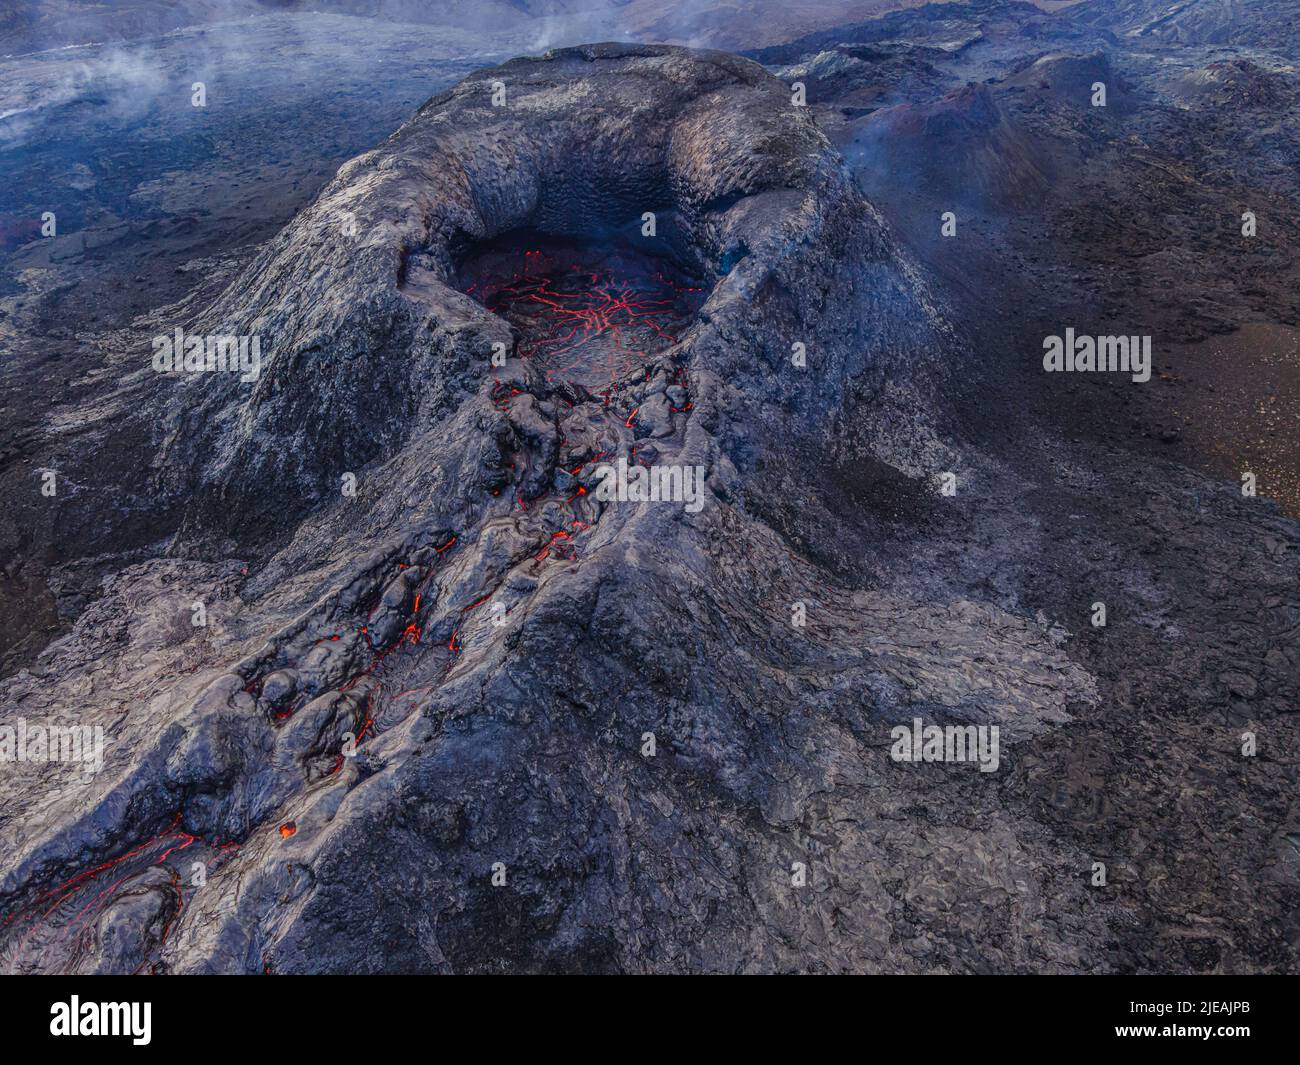 View of the volcanic crater. Structures of red lava in the crater mouth. Volcano just before eruption. dark, cooled magma rock around the crater. Stock Photo